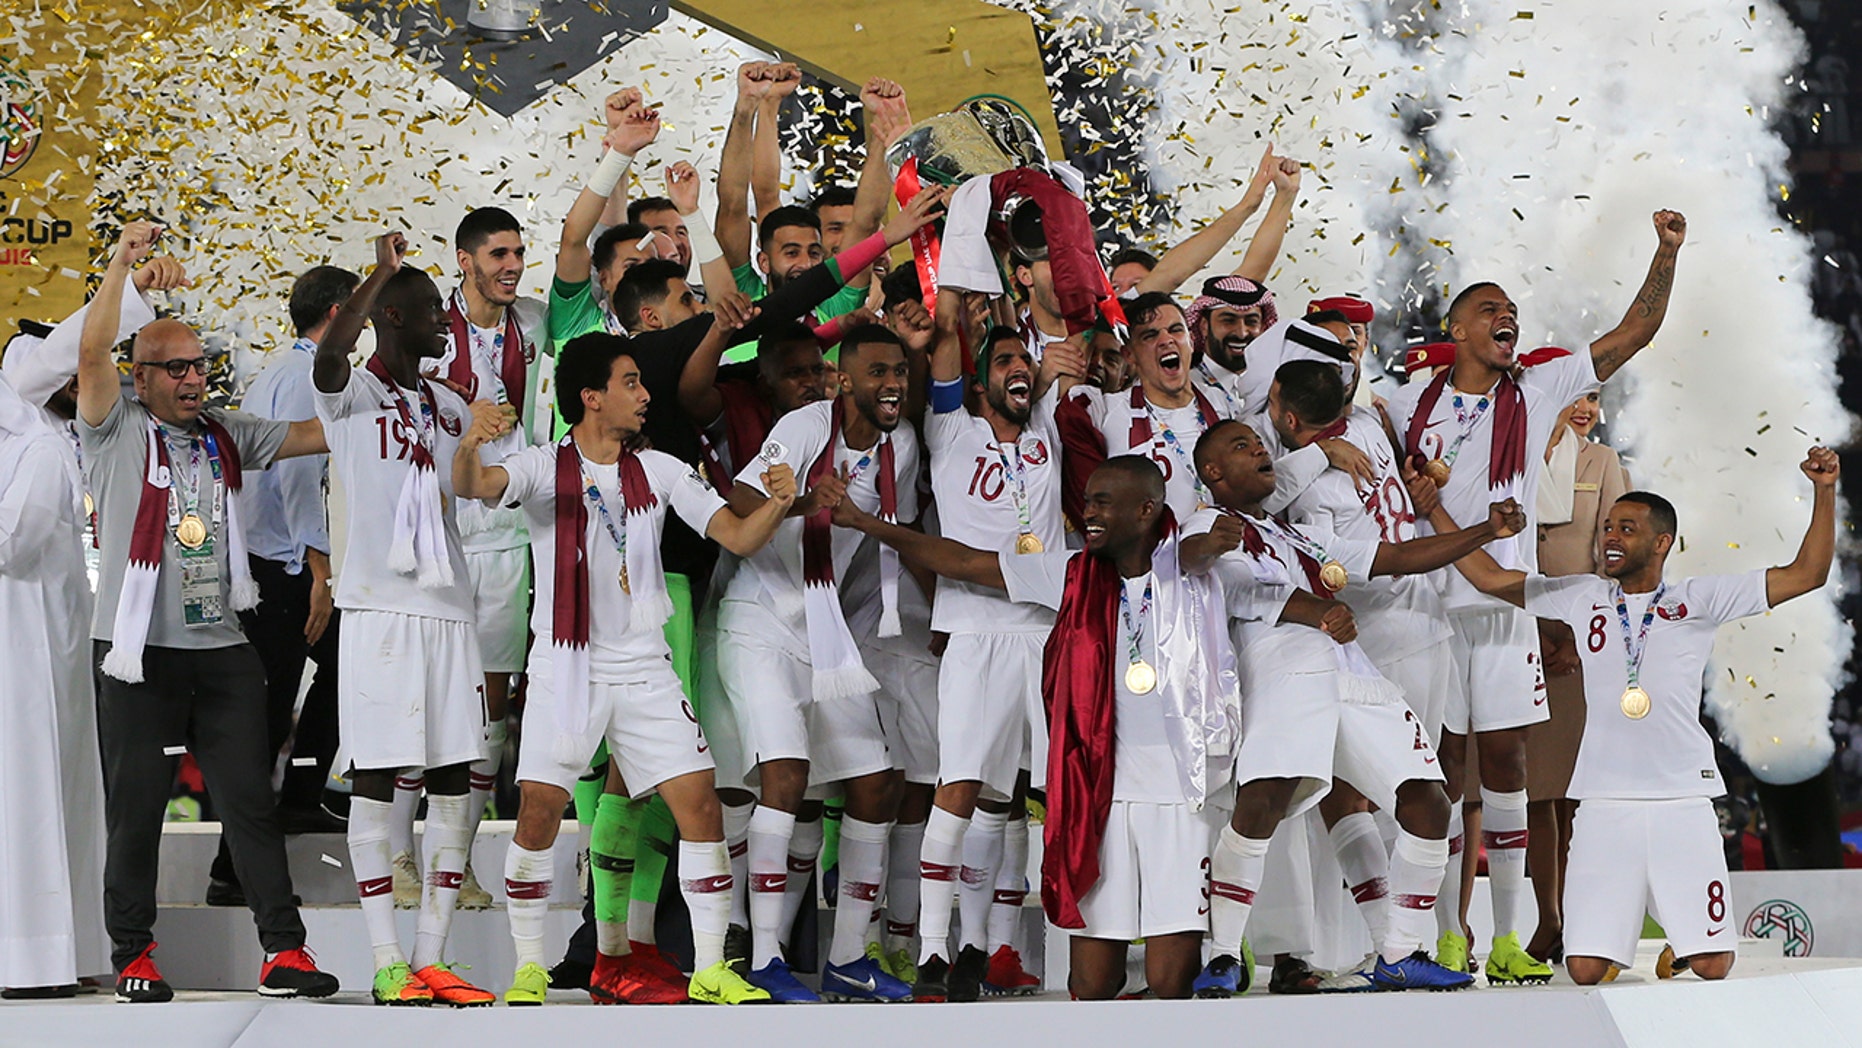 Qatar soccer team wins Asian Cup despite accusations from UAE of